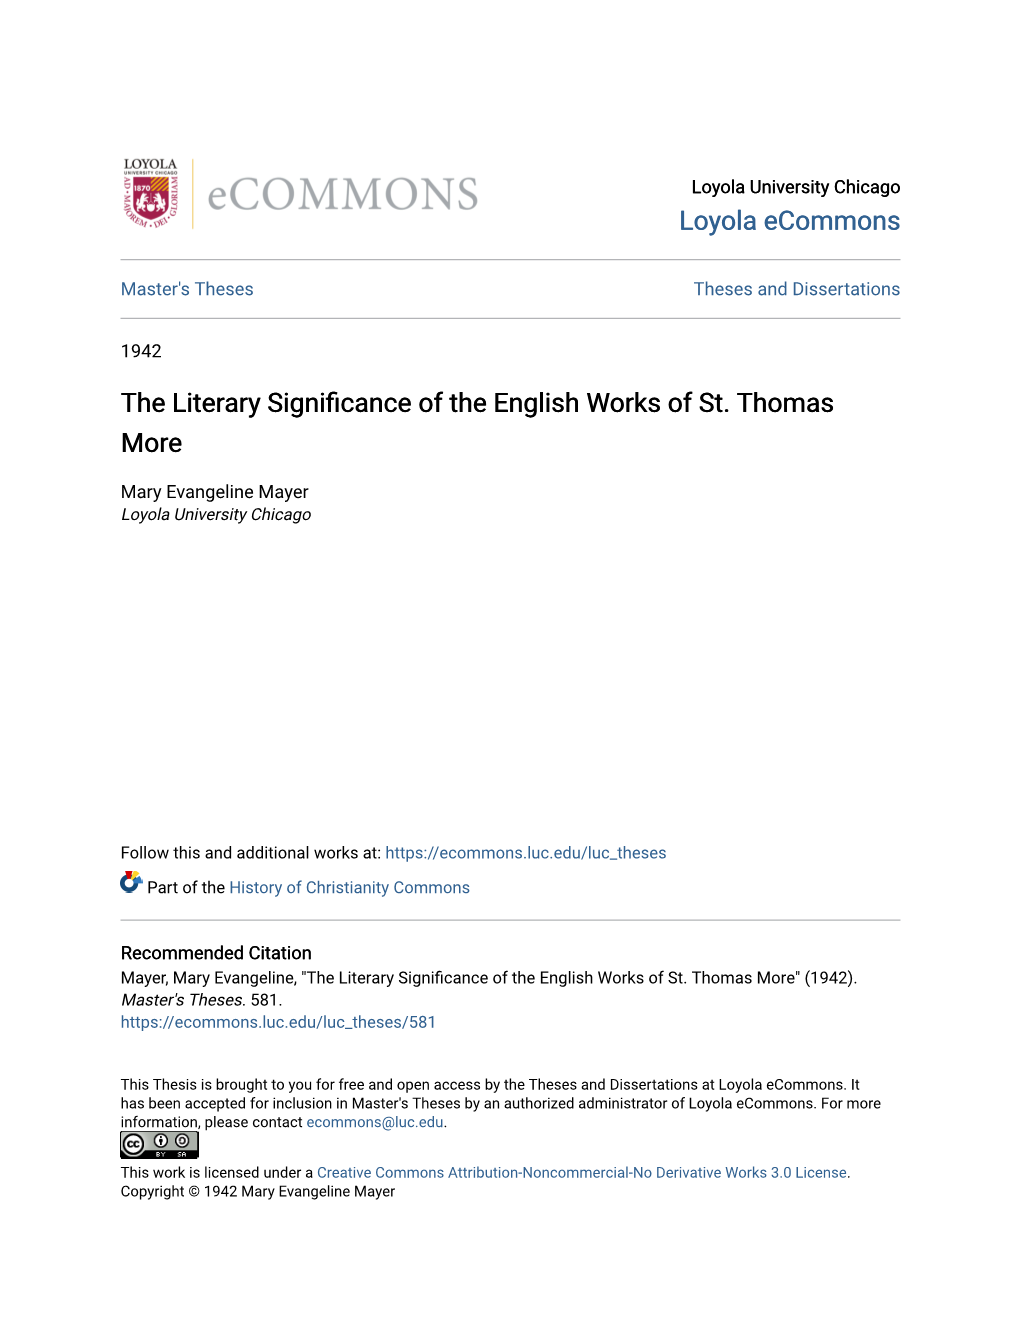 The Literary Significance of the English Works of St. Thomas More